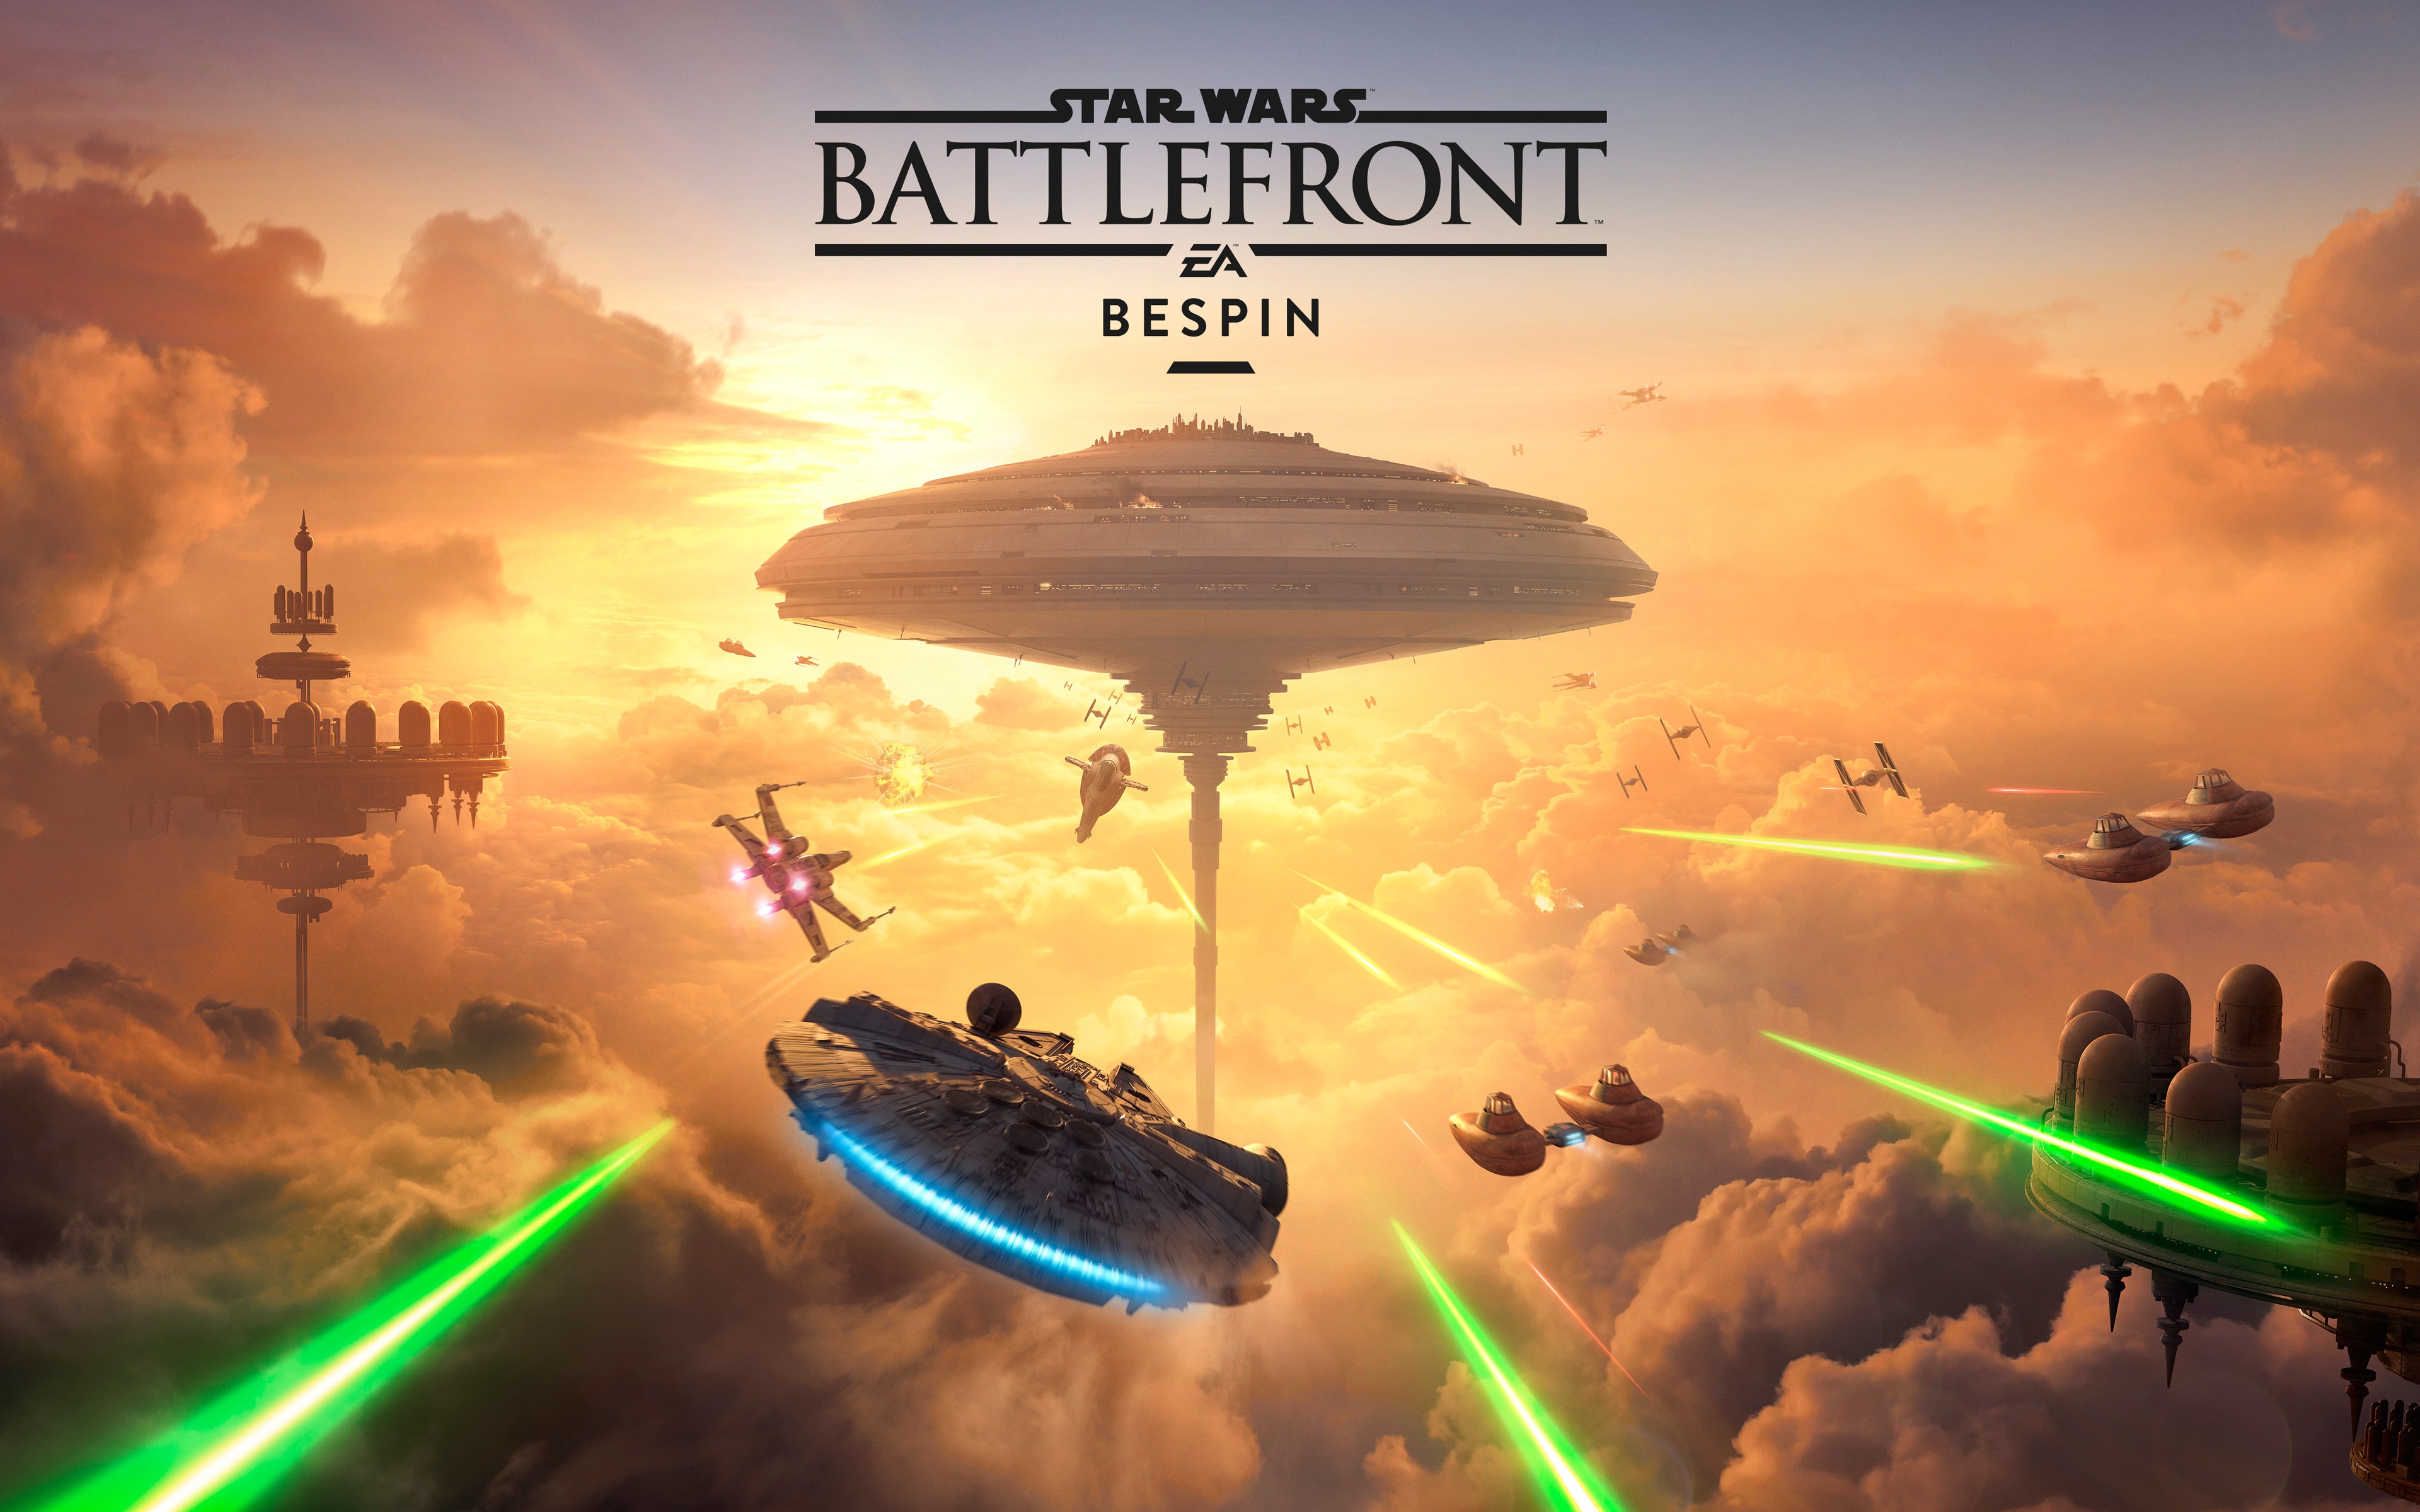 Star Wars: Battlefront, EA Games, Star Wars, Video games, Millennium Falcon, Bespin, Cloud city, X wing, Science fiction Wallpaper